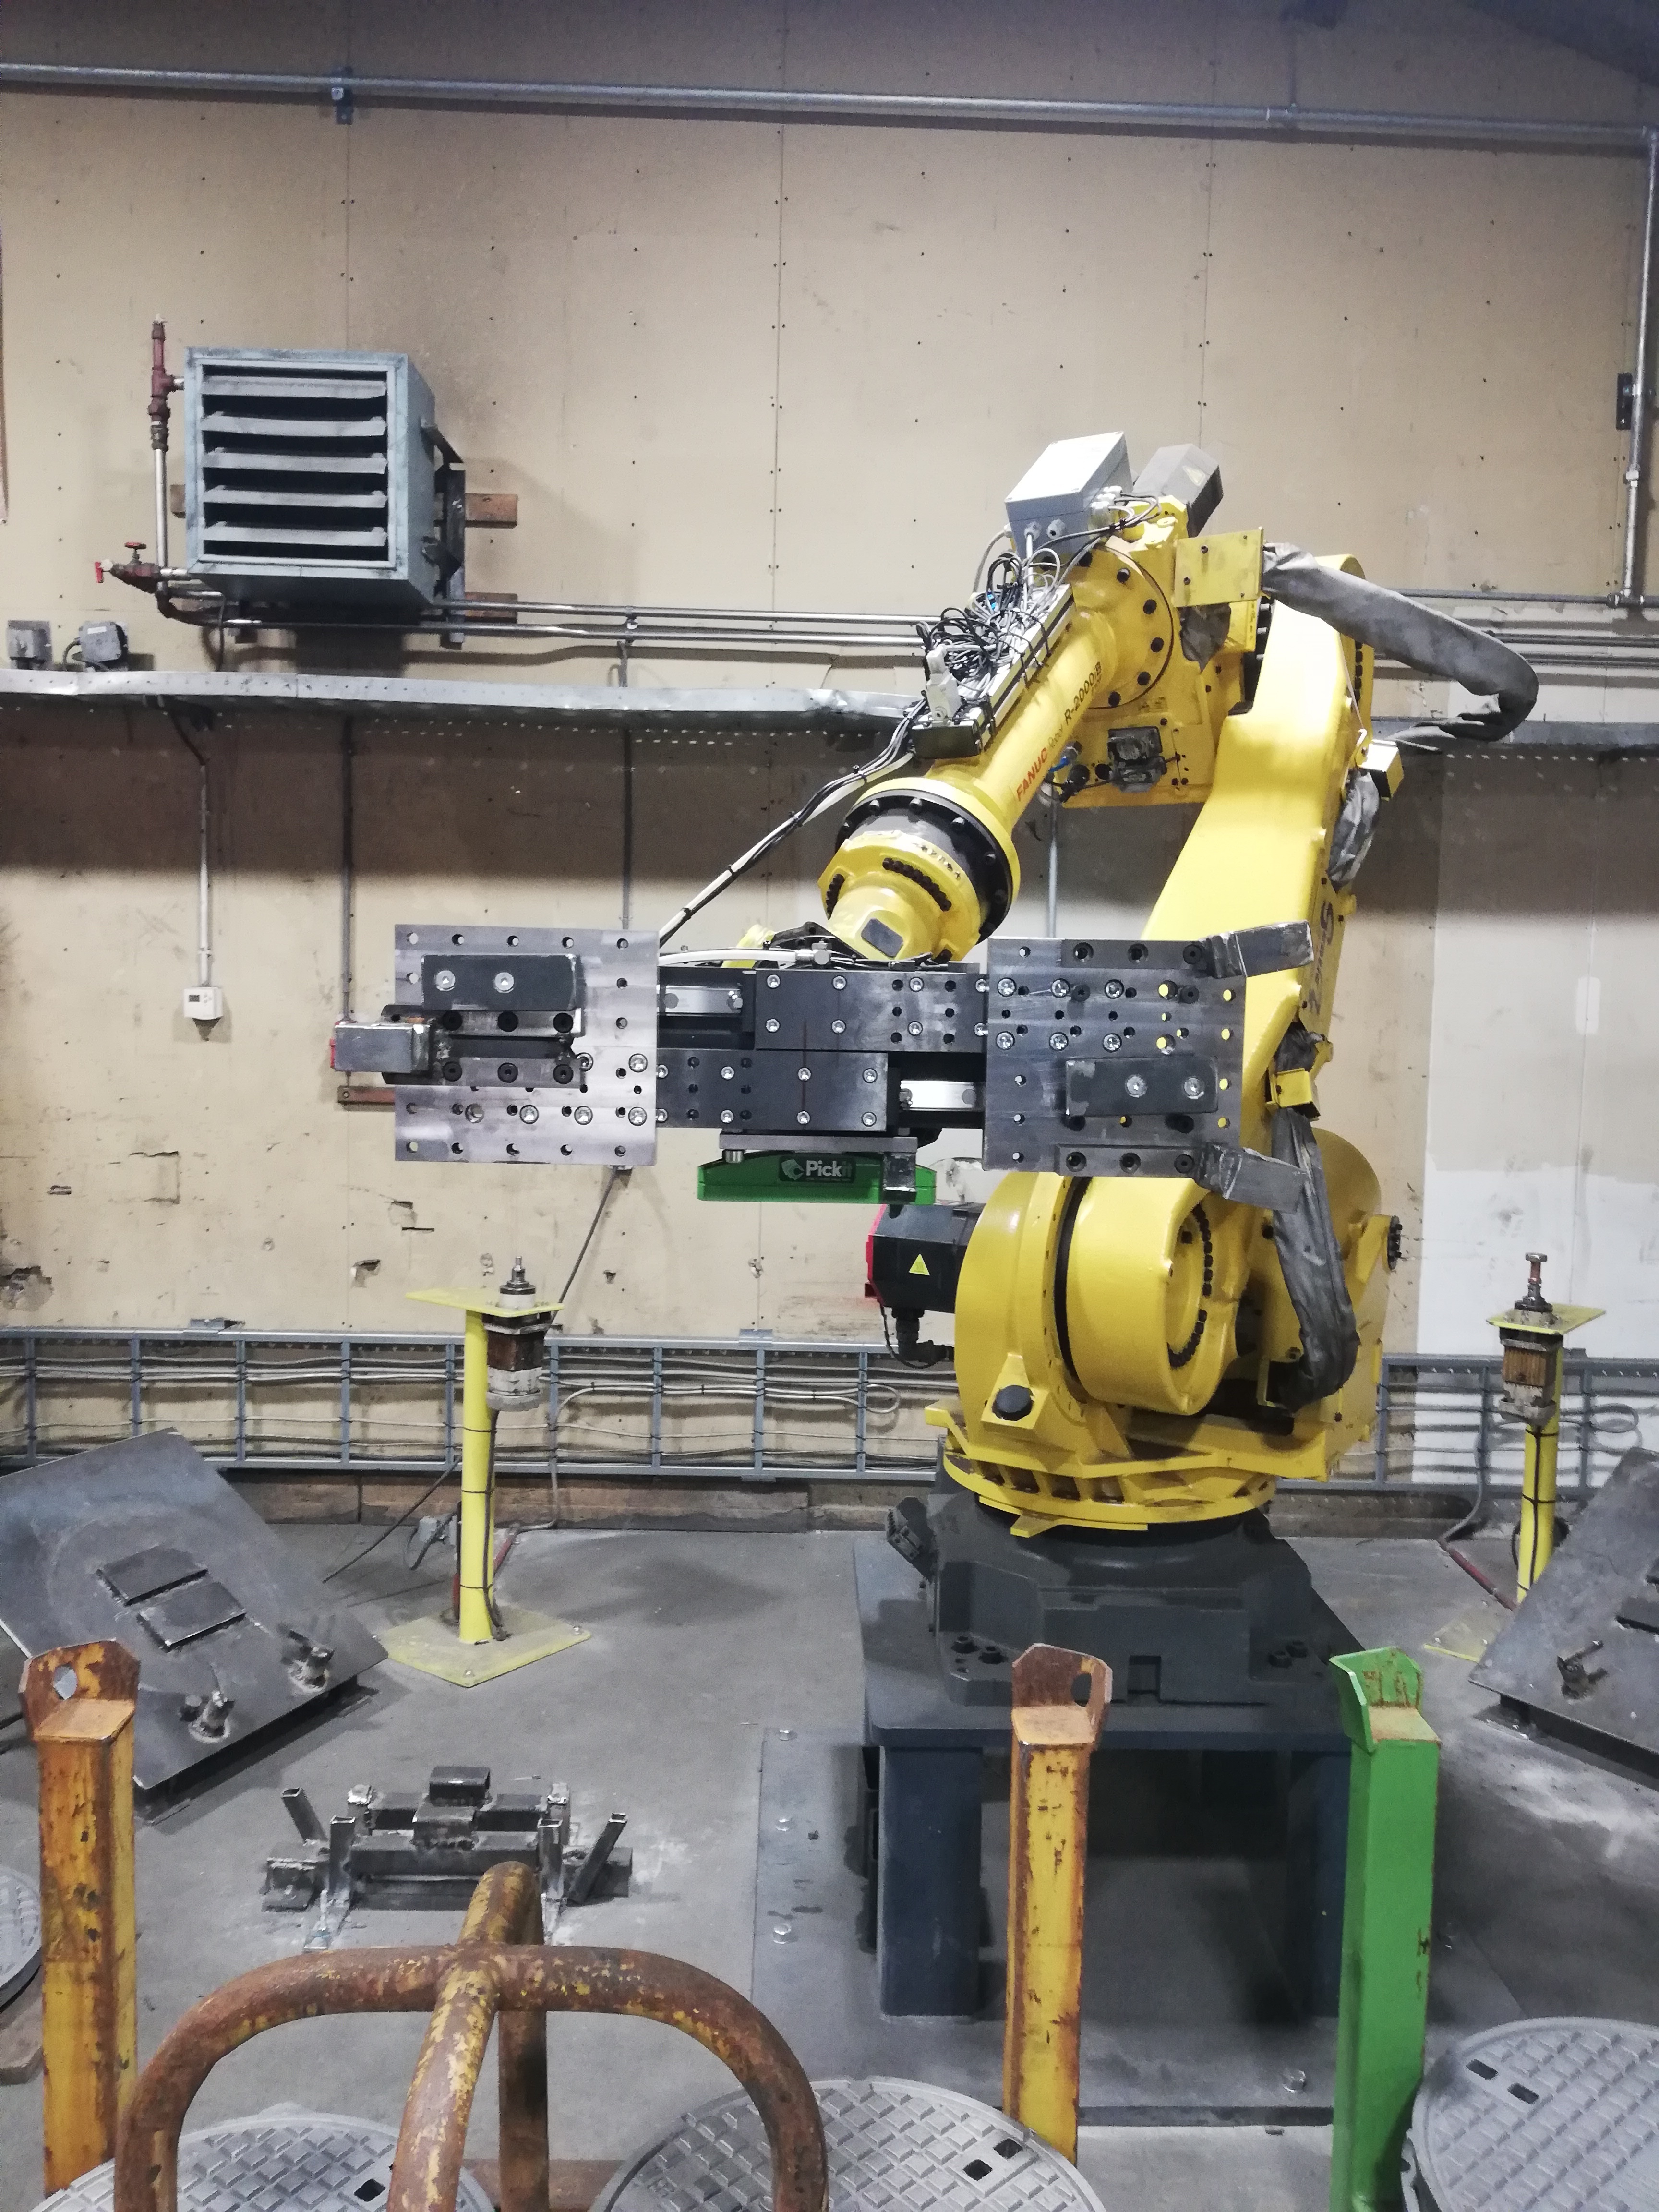 Pick-it 3D camera with Fanuc robot picking cast iron disks at Rademakers Foundry in the Netherlands.